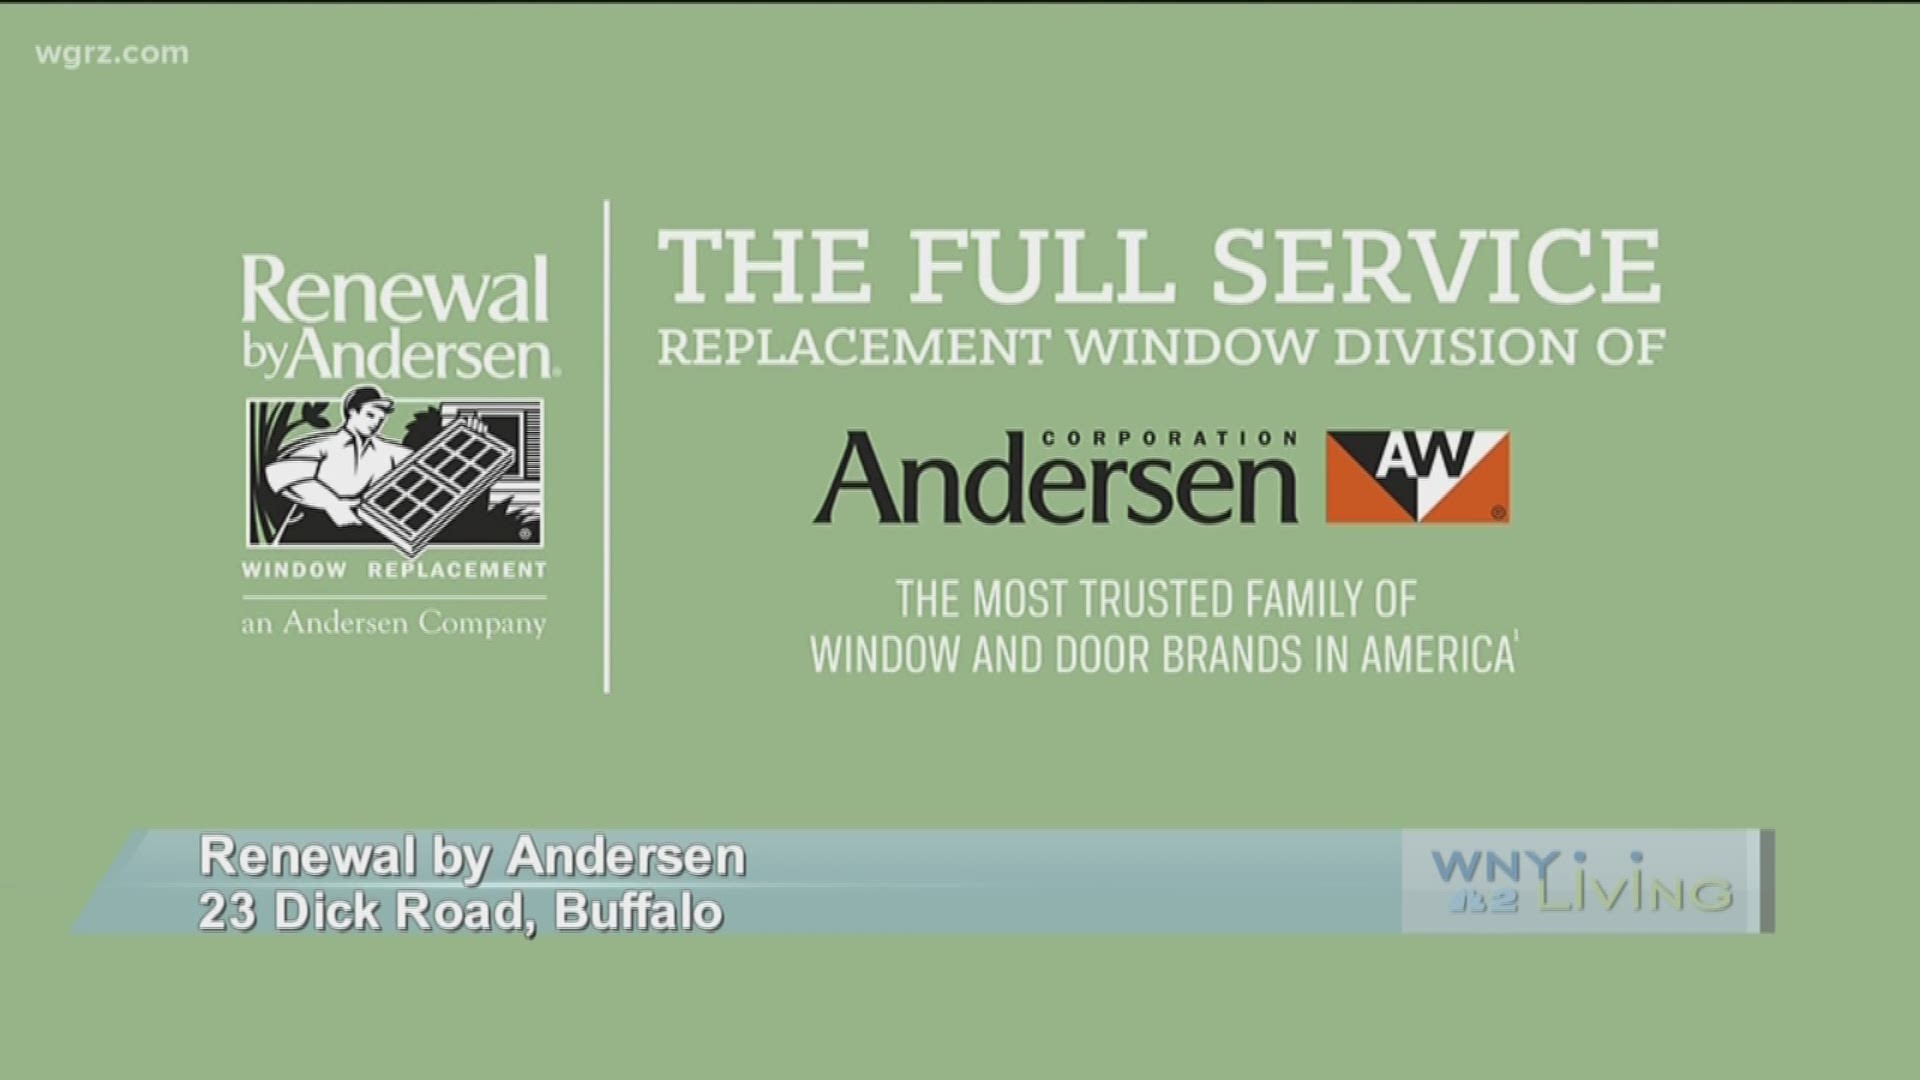 WNY Living - May 18 - Renewal by Andersen (SPONSORED CONTENT)